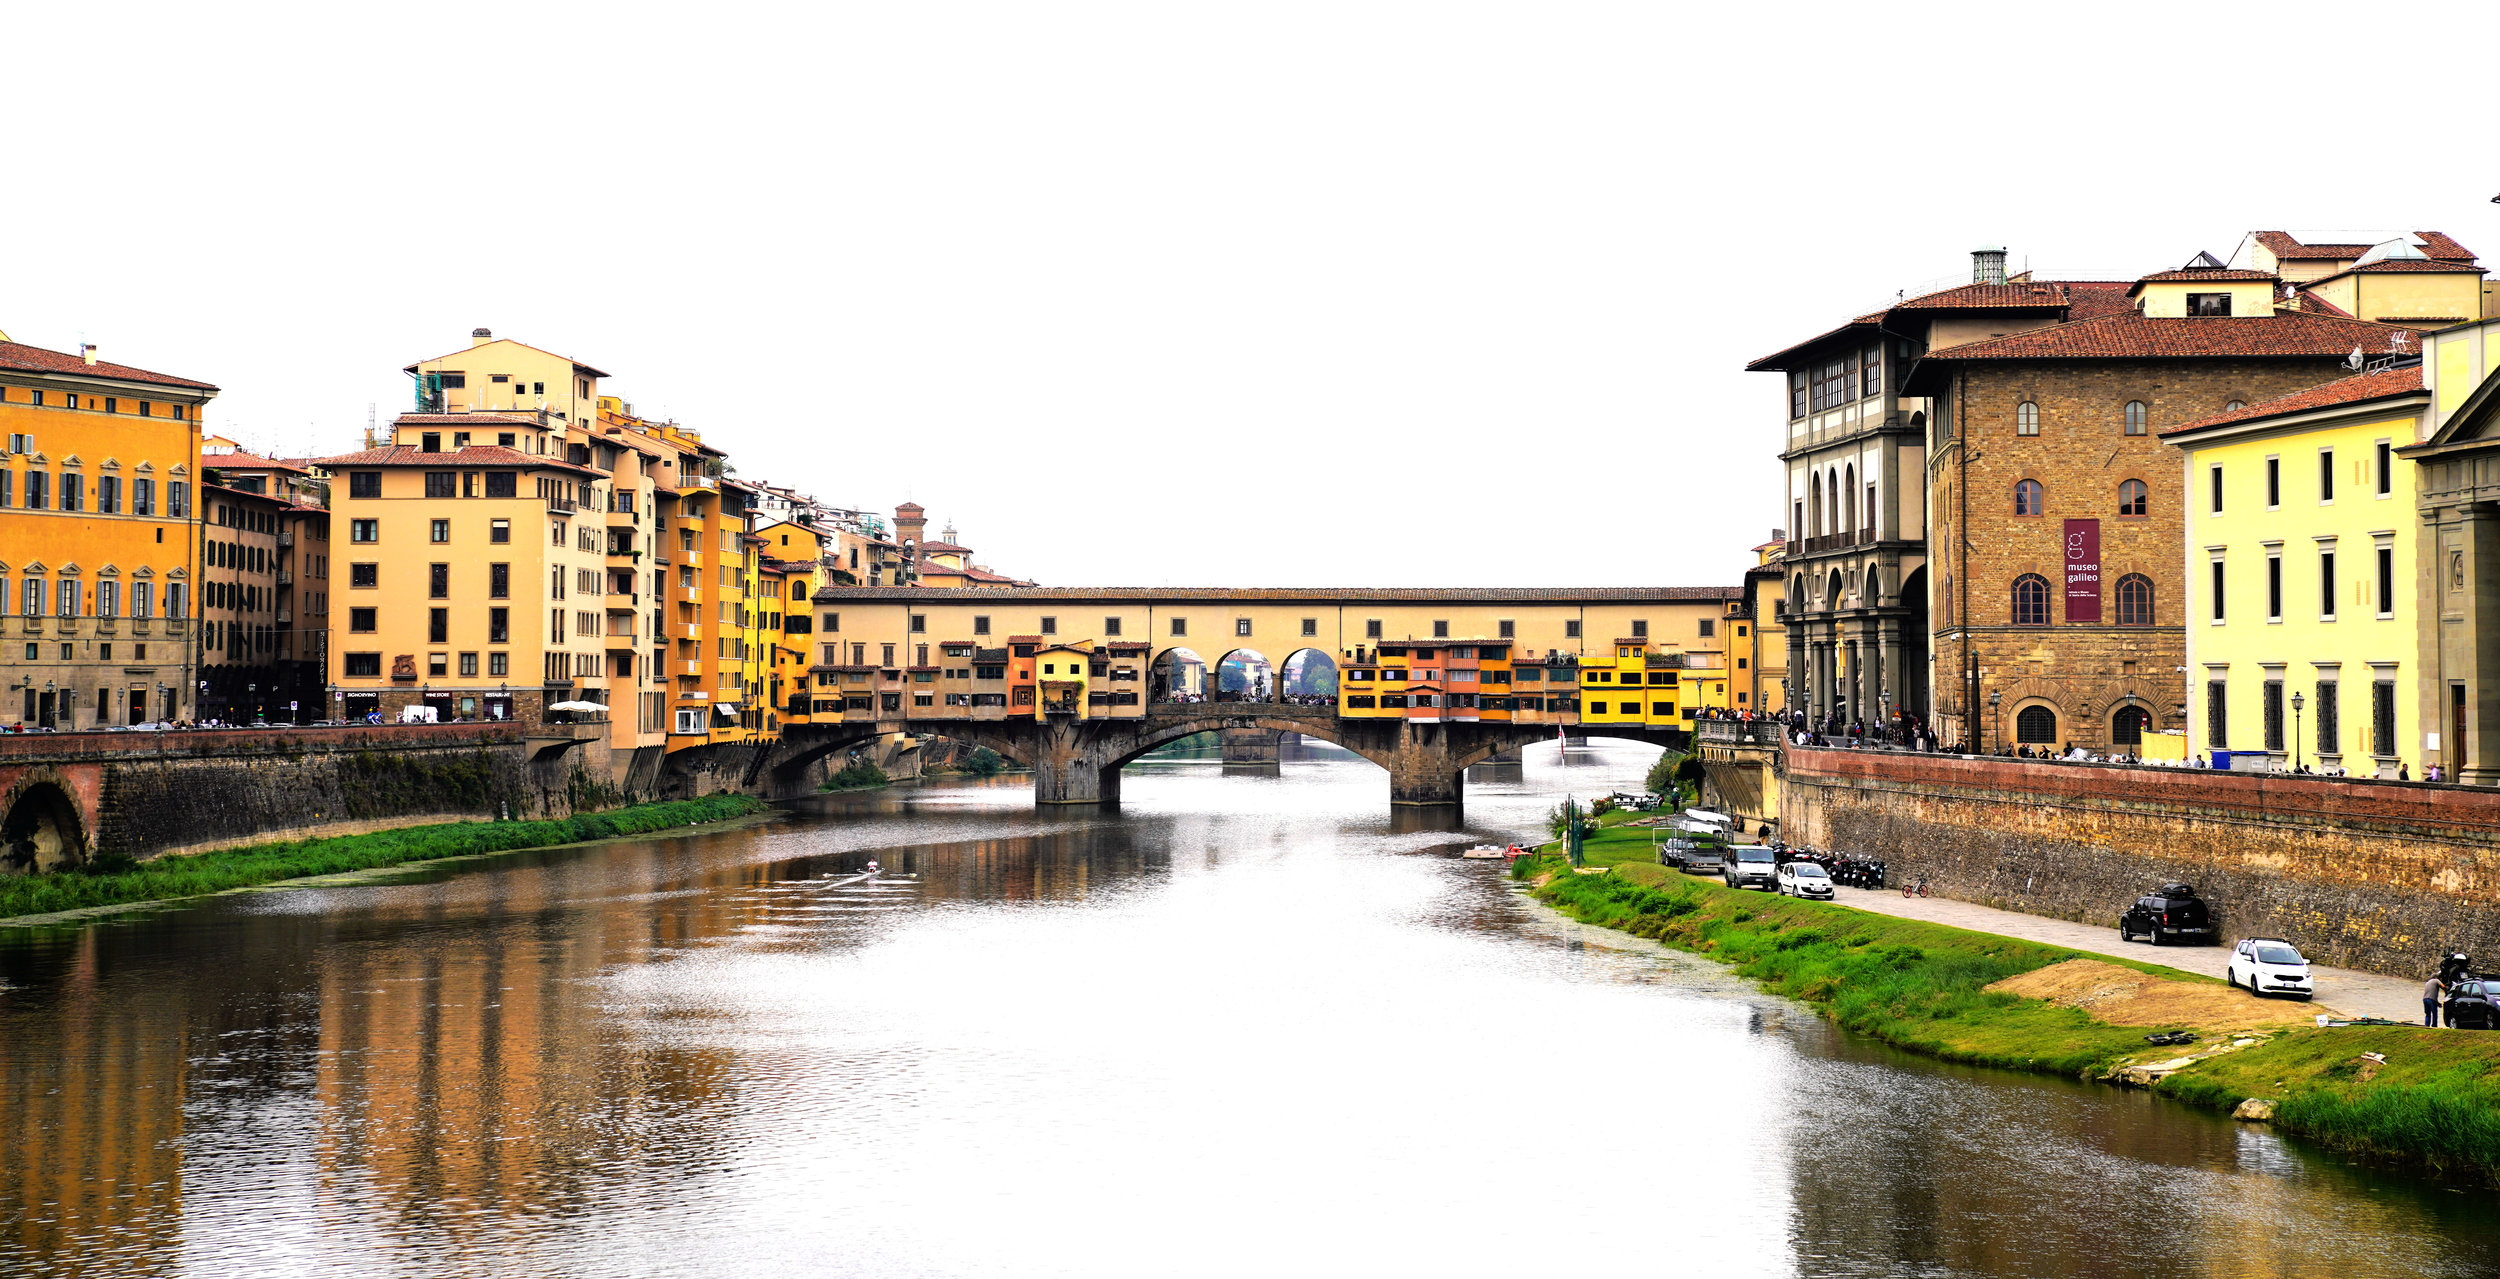  The Ponte Vecchio viewed from further down the river. 